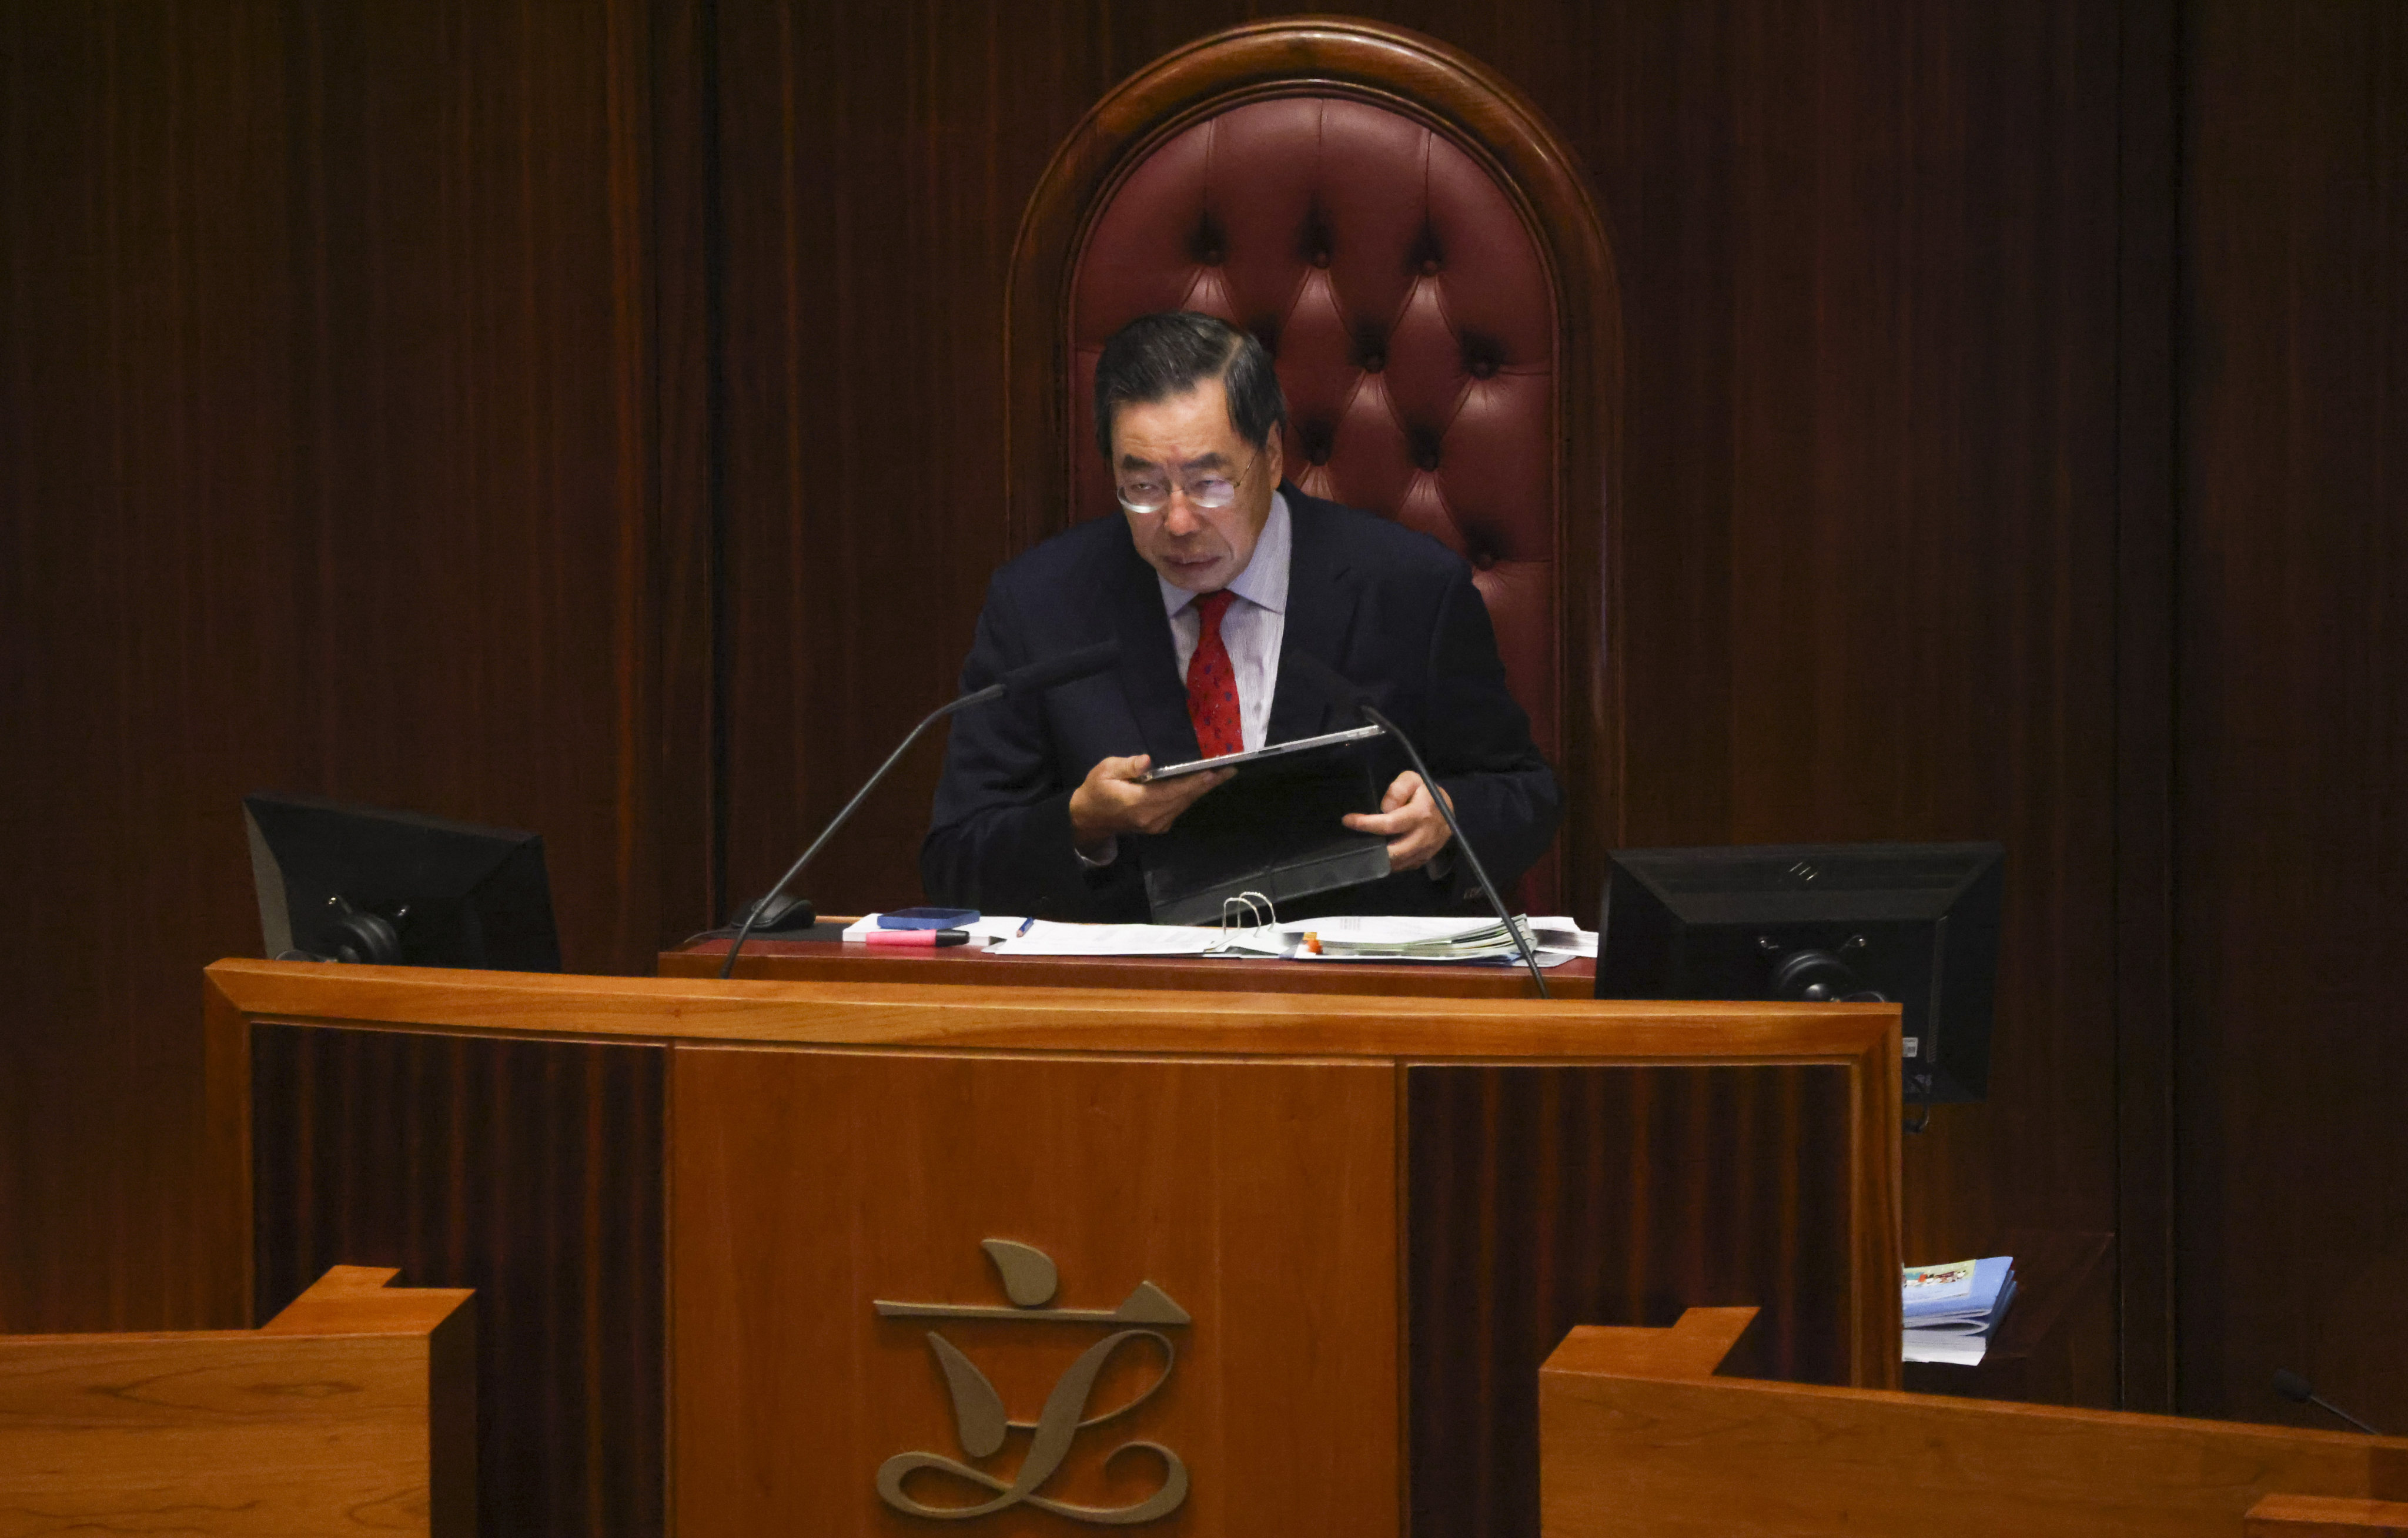 Legislative Council President Andrew Leung says lawmakers will comply with a request to drastically reduce the number of questions they will ask about the next budget. Photo: Nora Tam